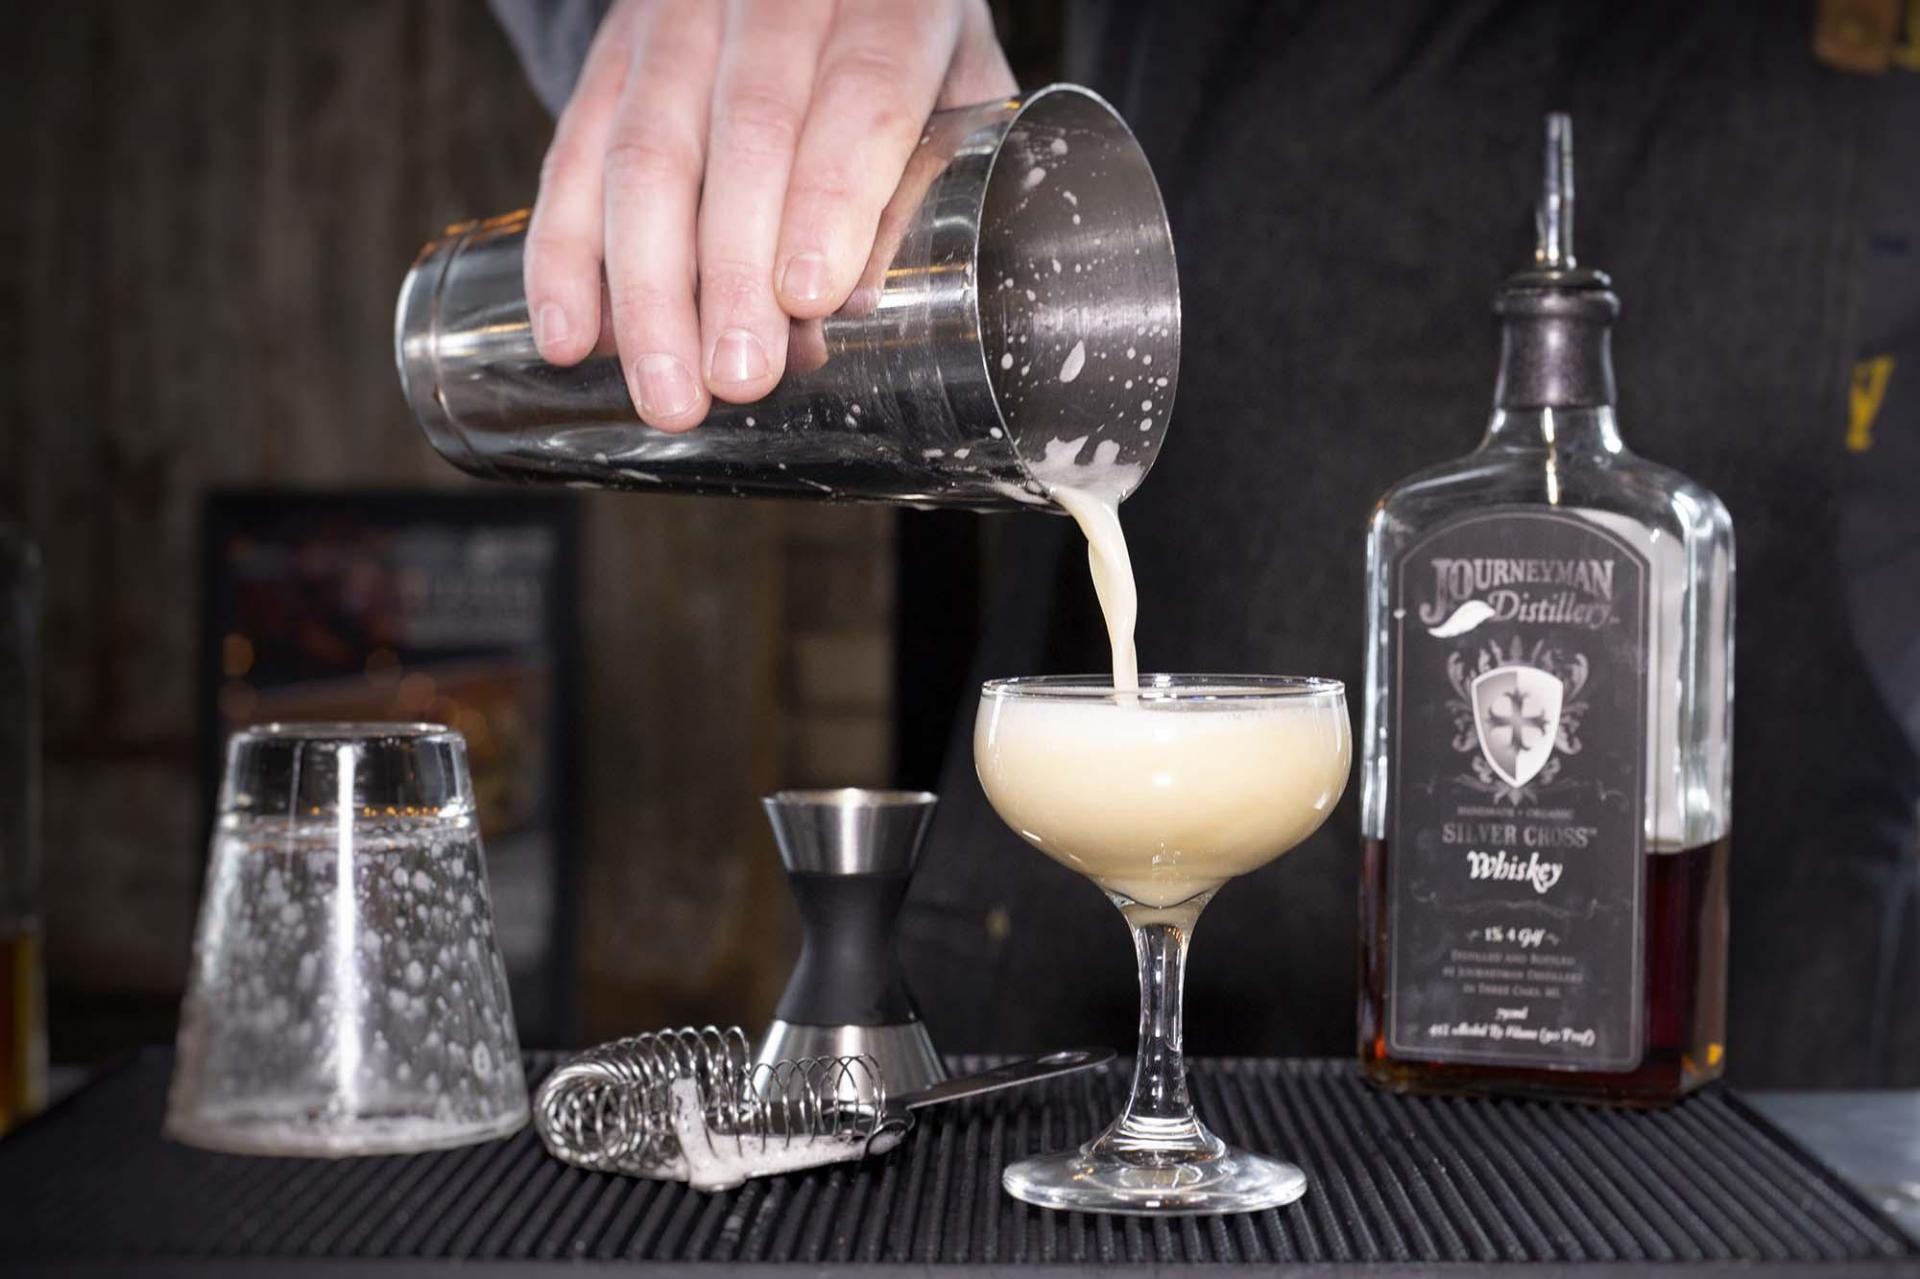 A cocktail being poured at Journeyman Distillery